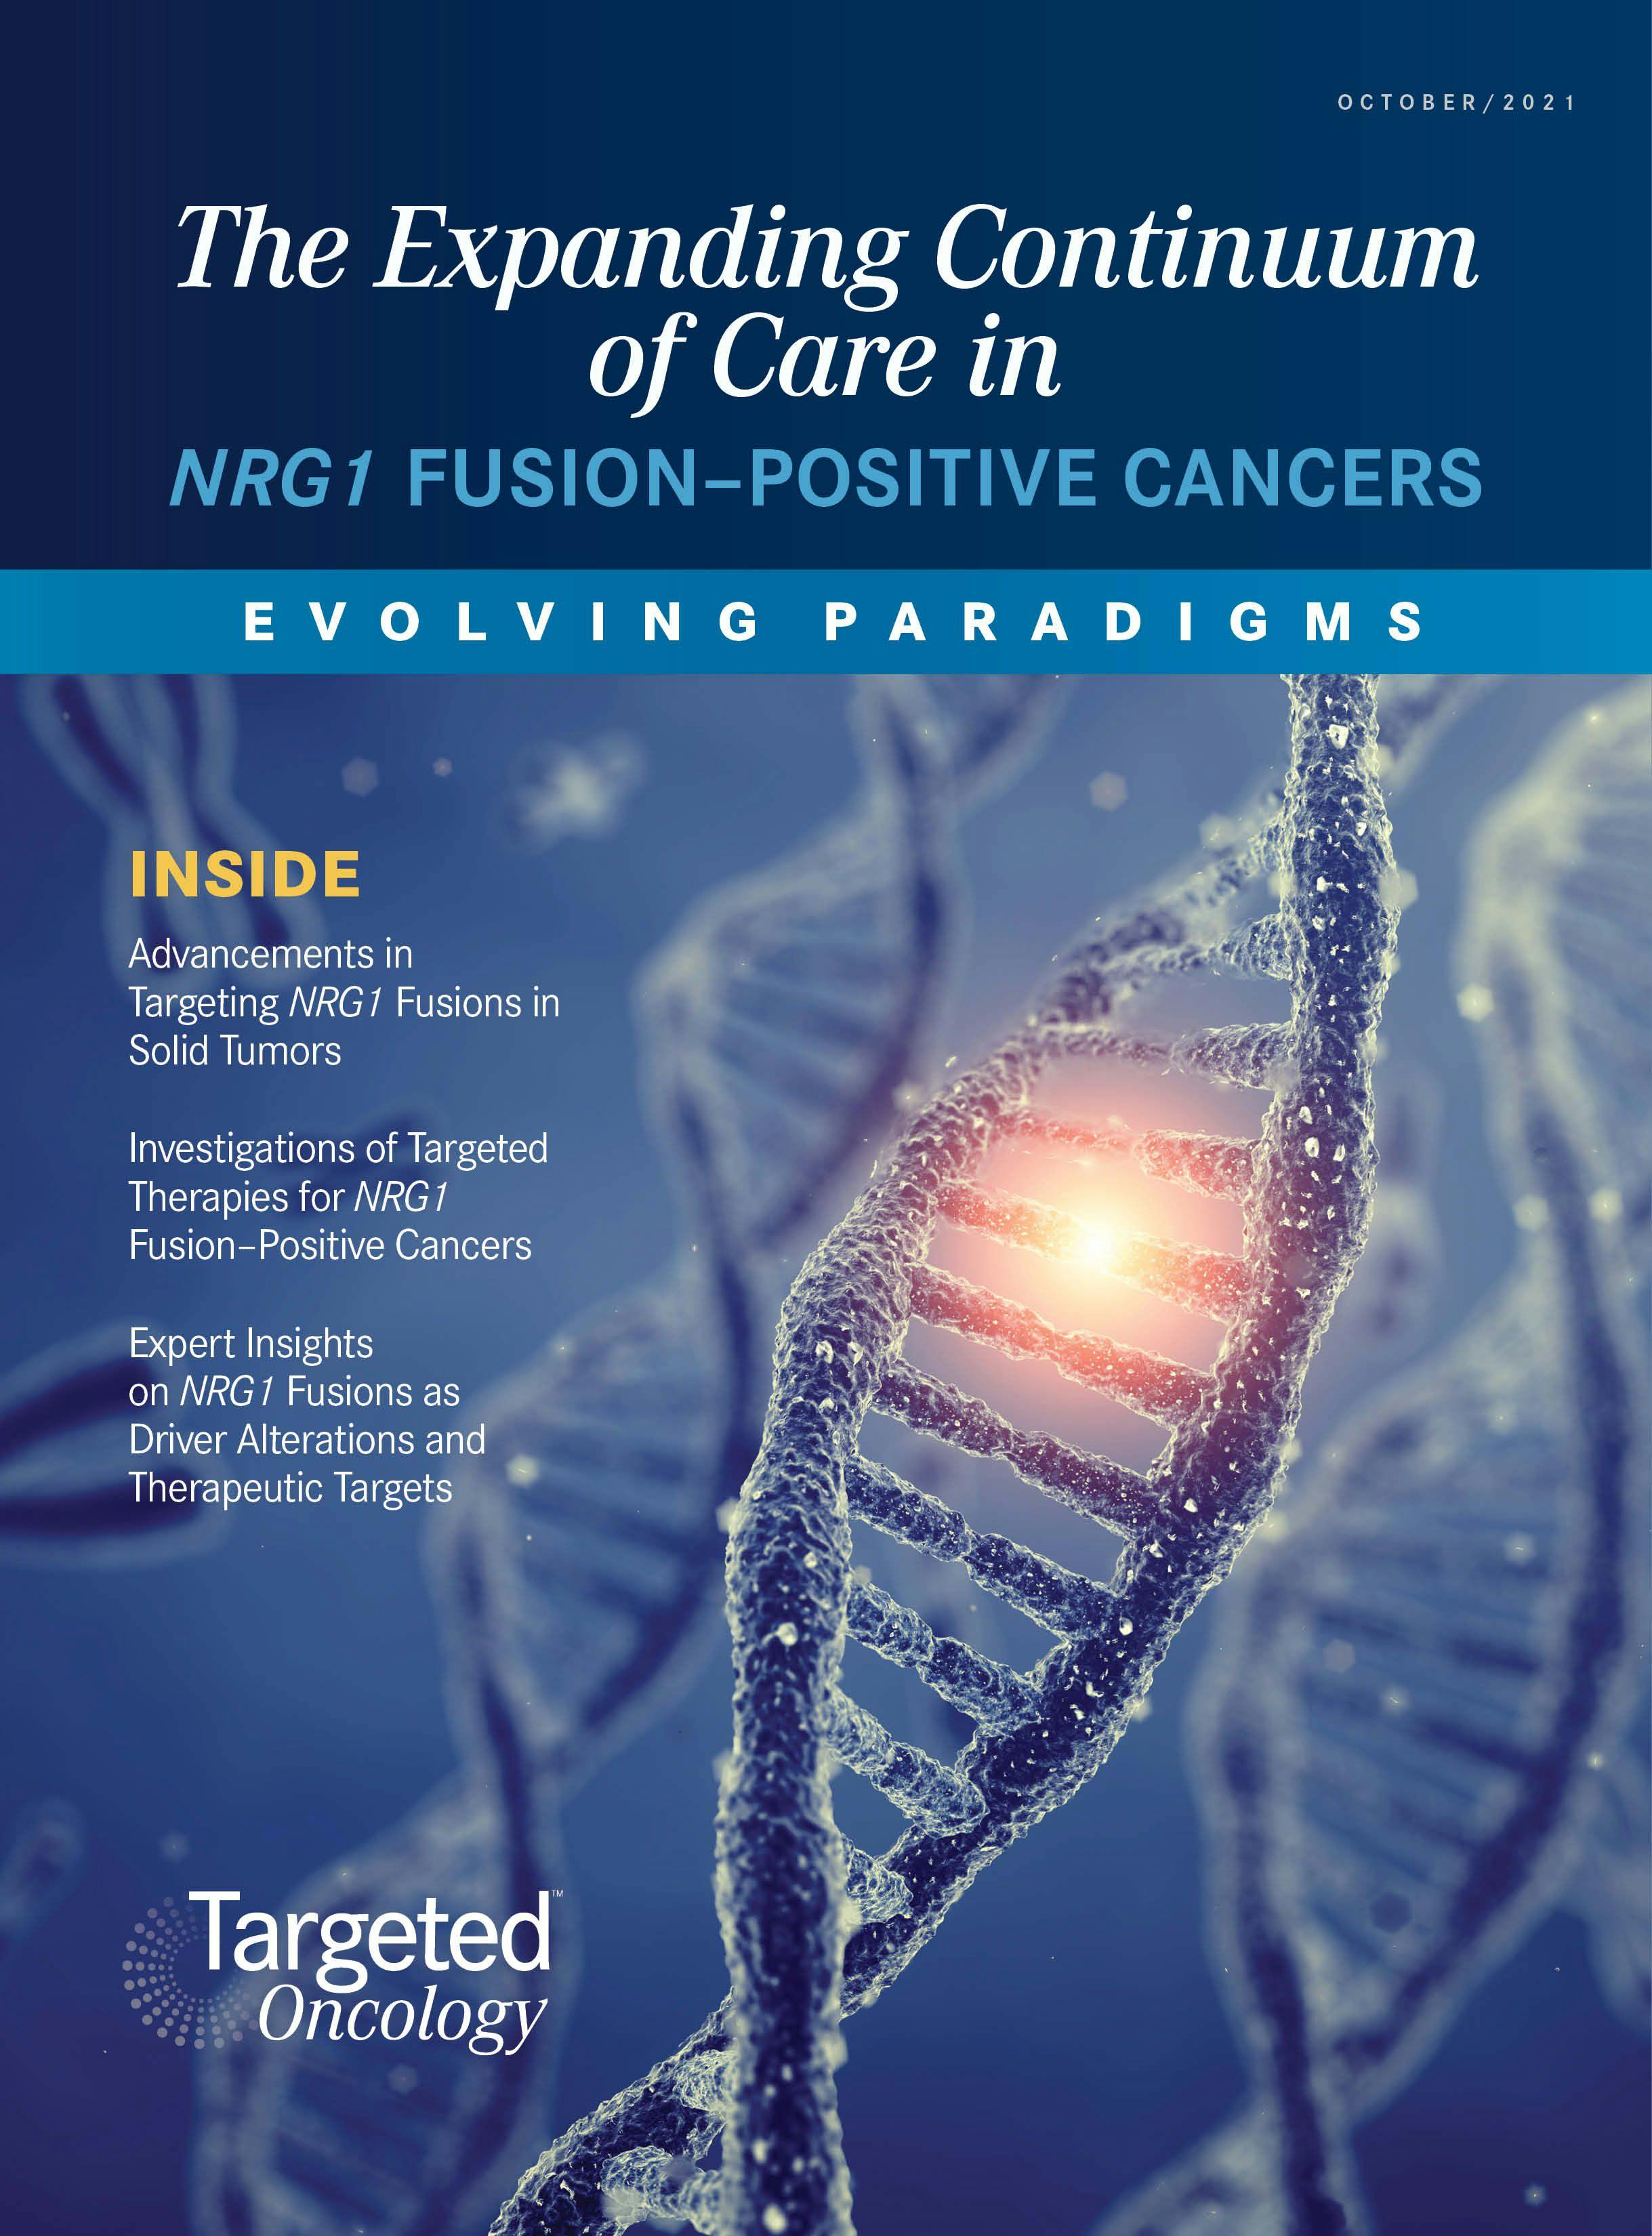 The Expanding Continuum of Care in NRG1 Fusion-Positive Cancers